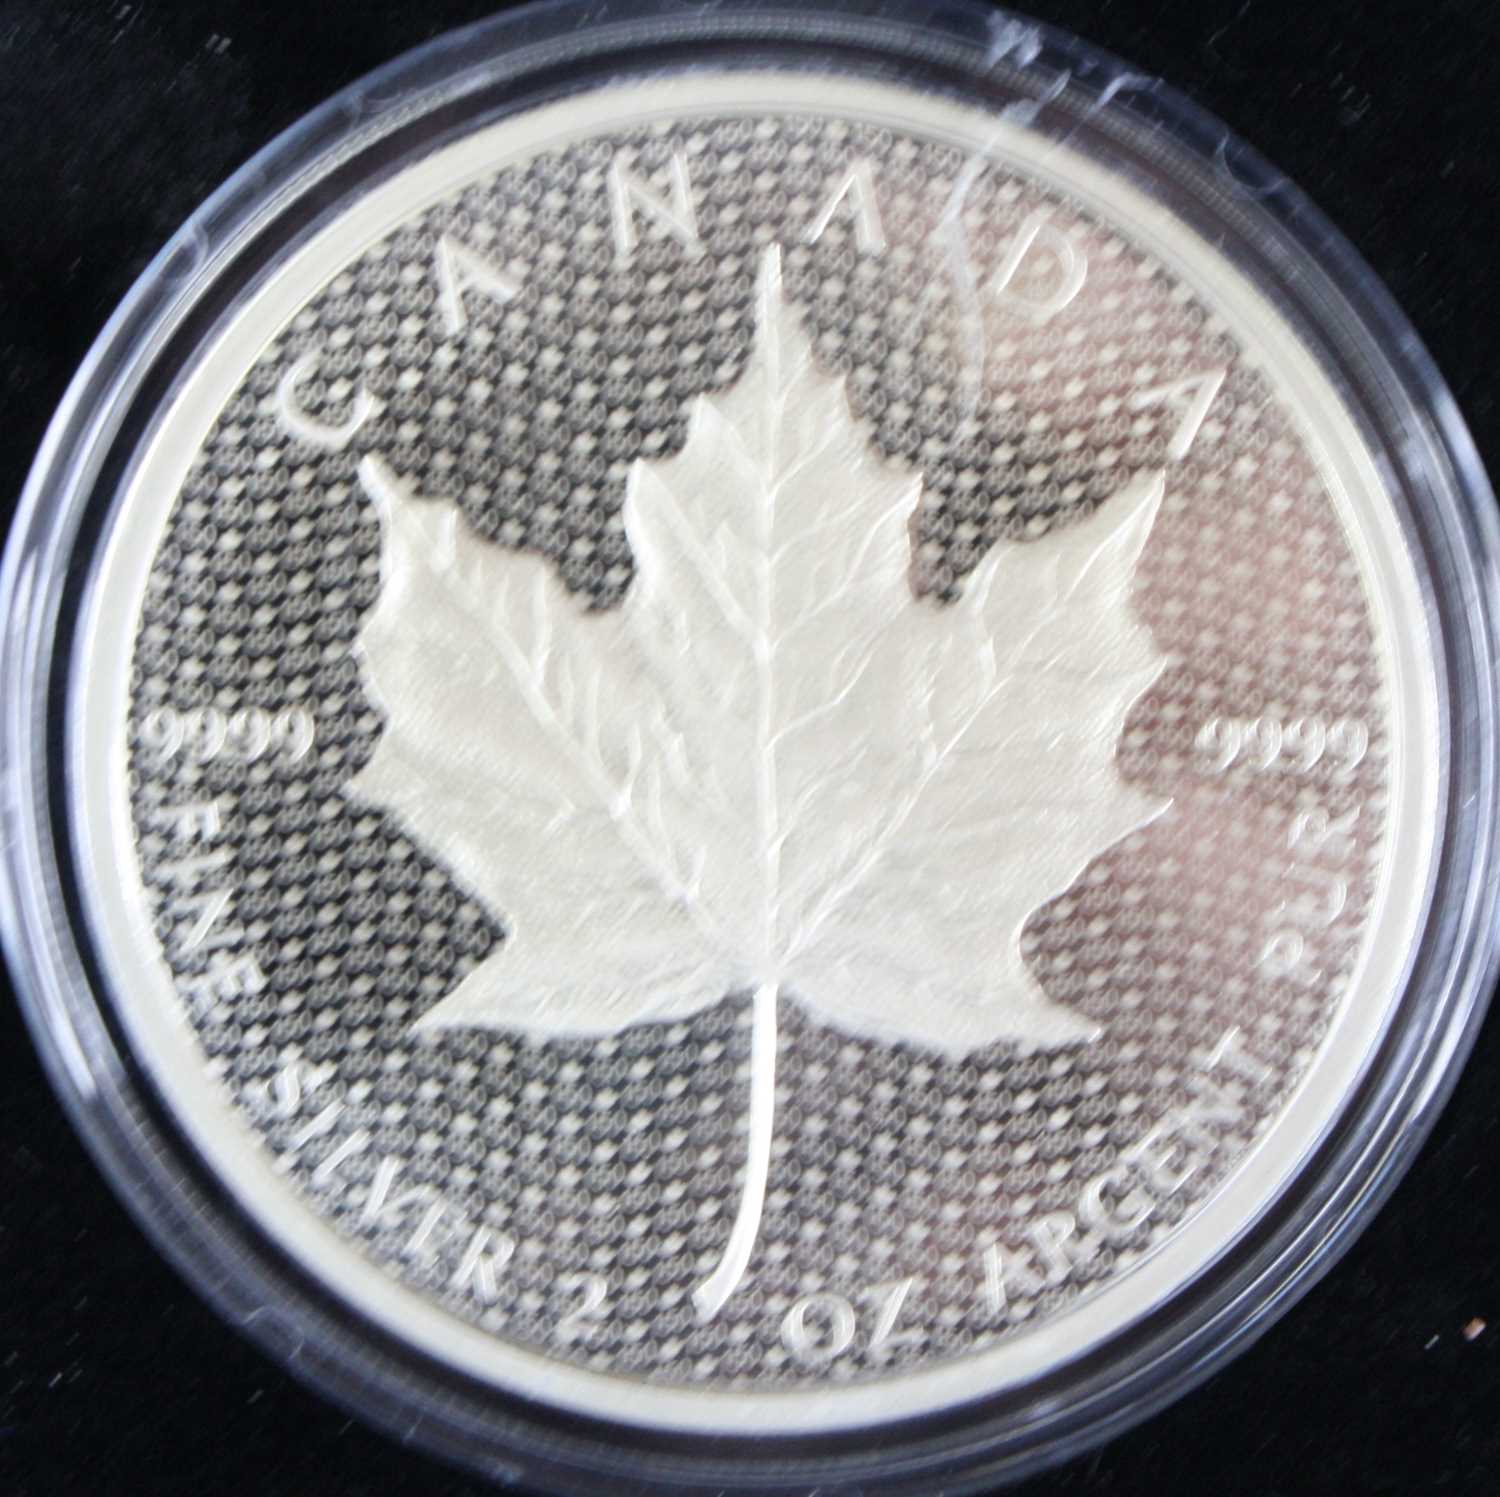 Royal Canadian Mint, 2017 $10 Fine Silver Coin, obv: Elizabeth II, rev: Maple leaf in centre with - Image 2 of 2